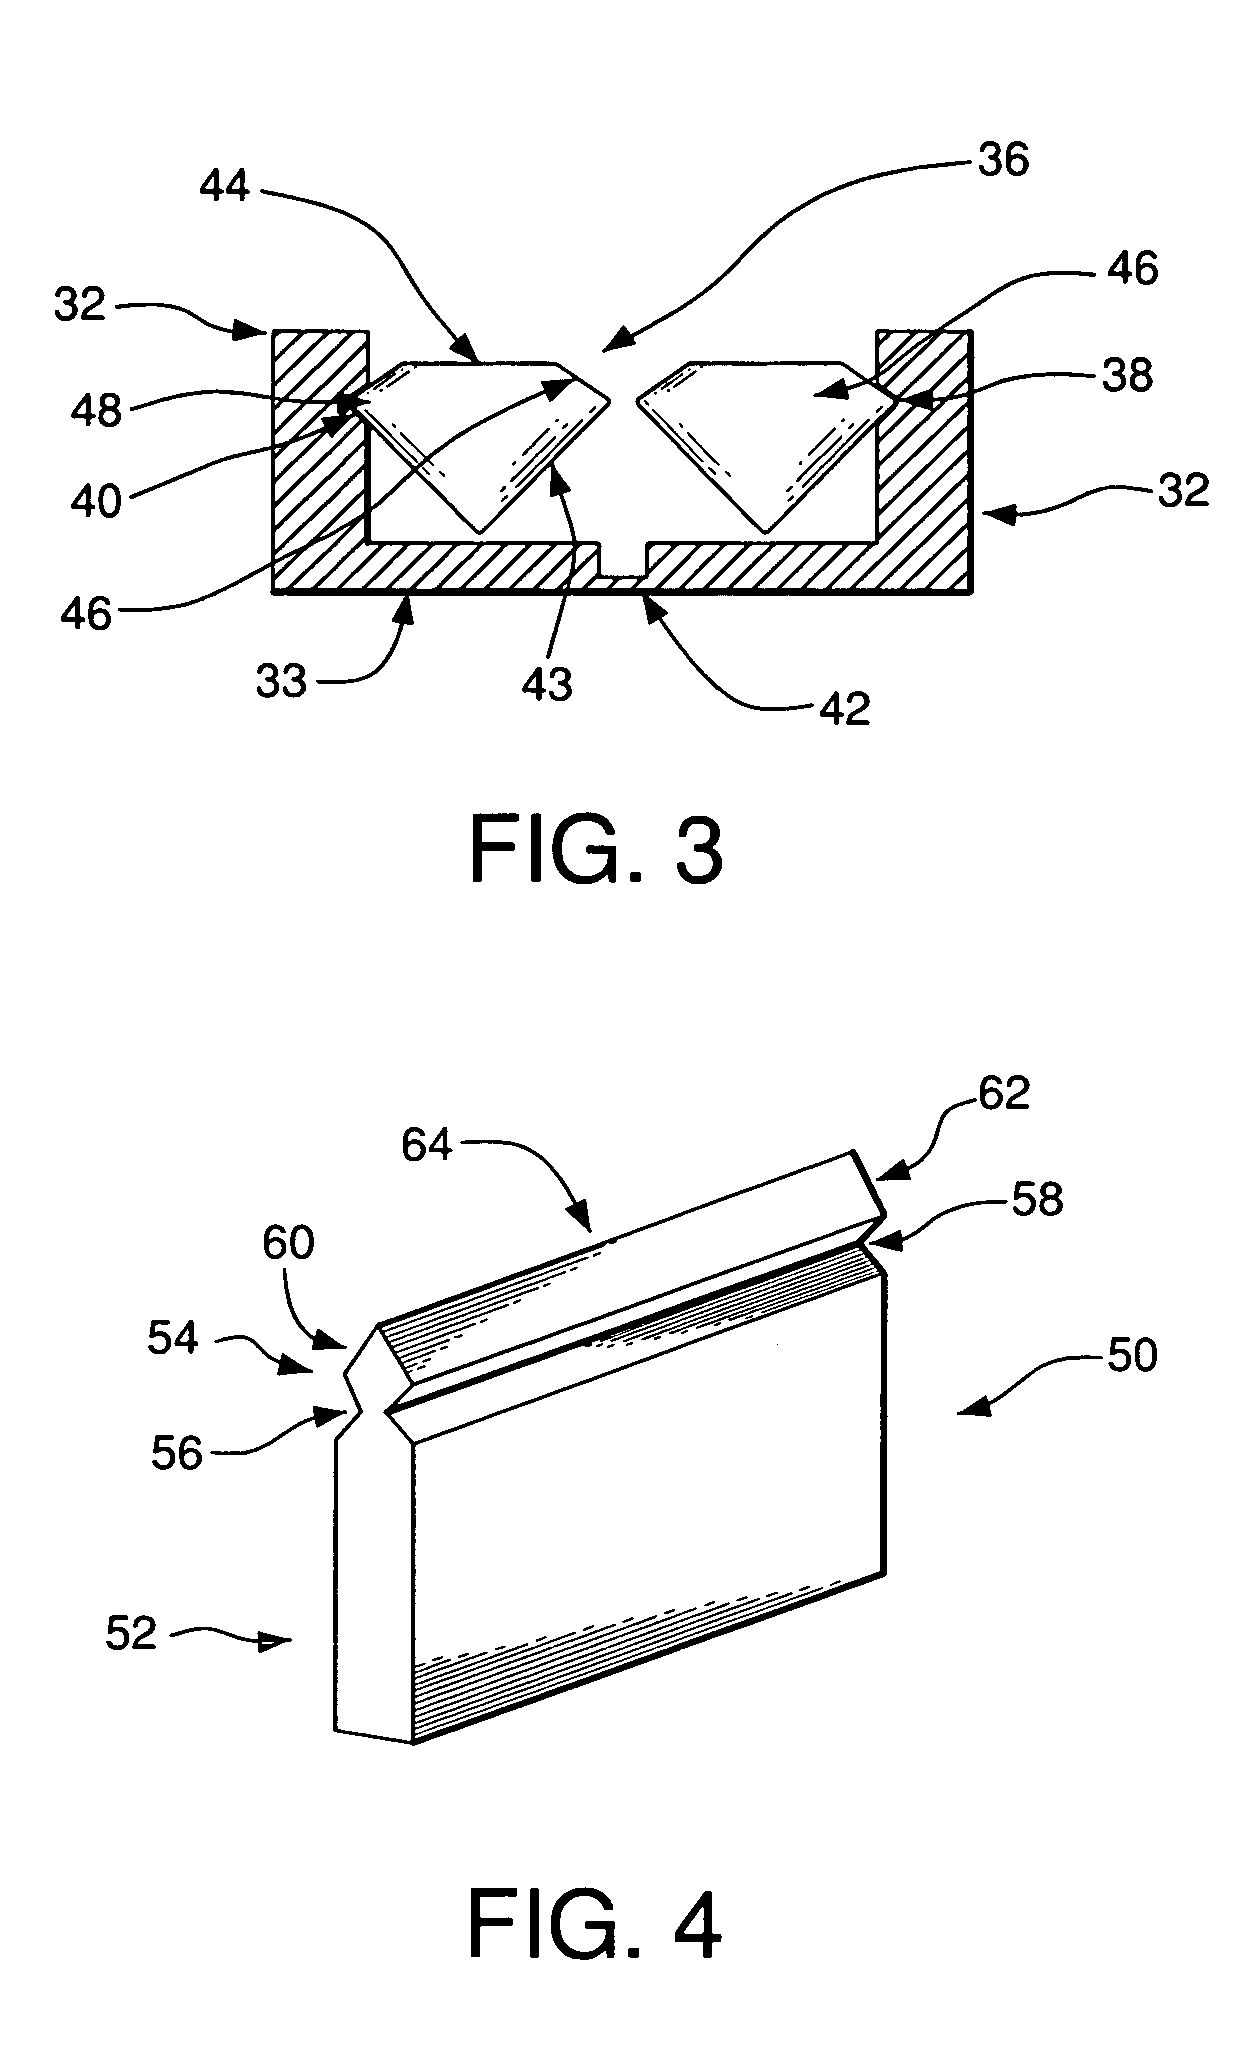 Method for securing gemstones in an effectively invisible setting